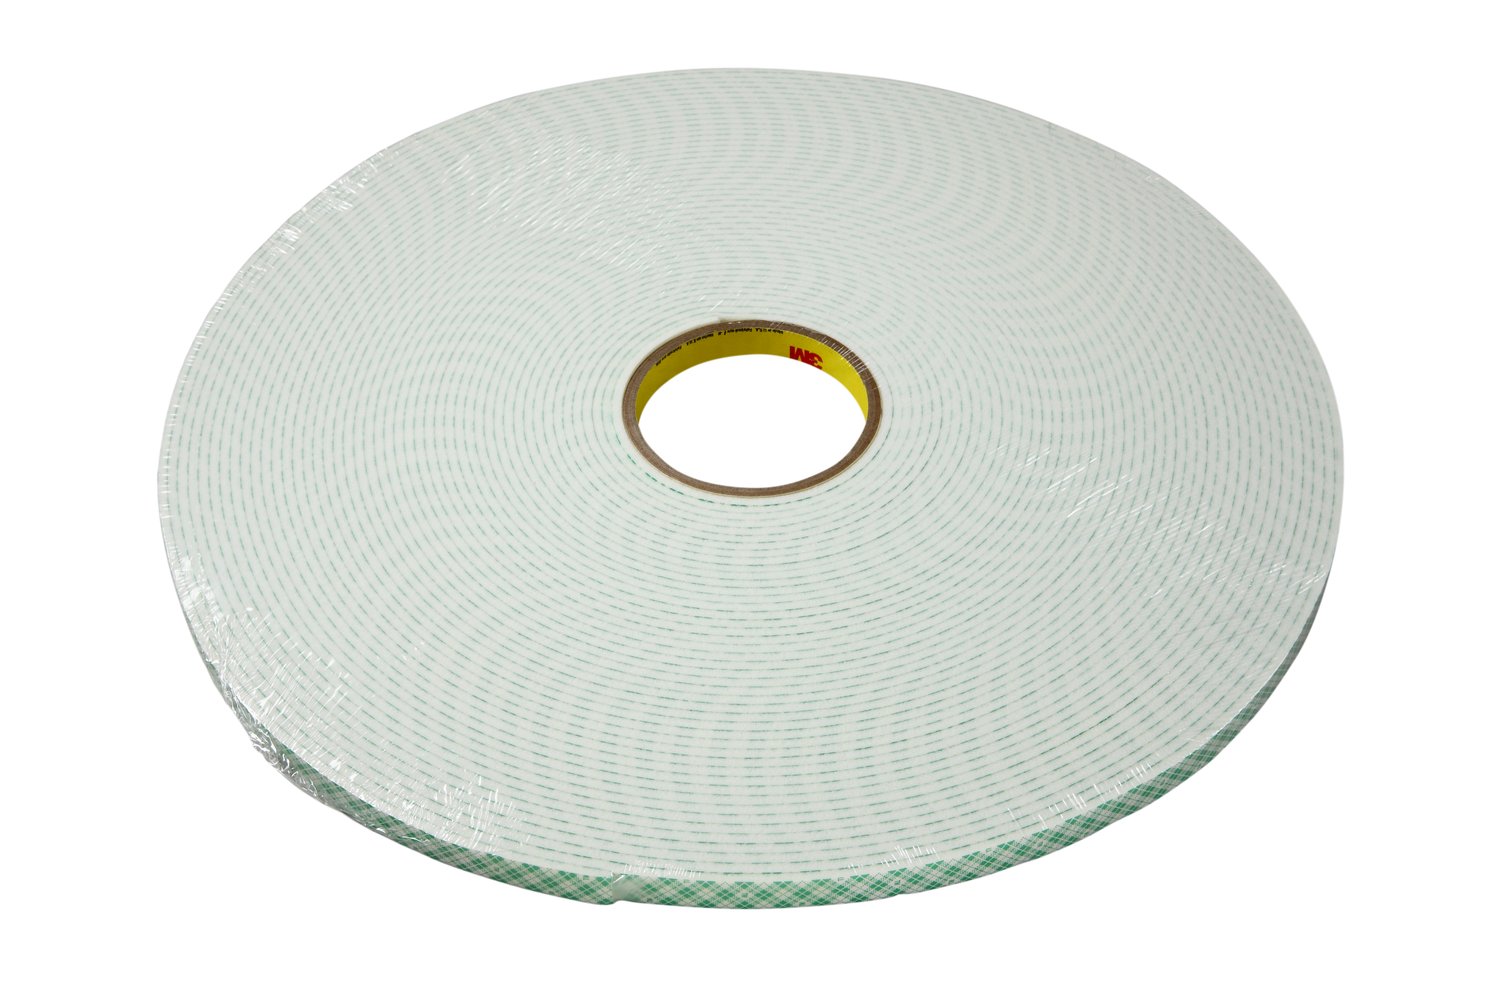 7000047505 - 3M Double Coated Urethane Foam Tape 4008, Off White, 3/8 in x 36 yd,
125 mil, 24 rolls per case